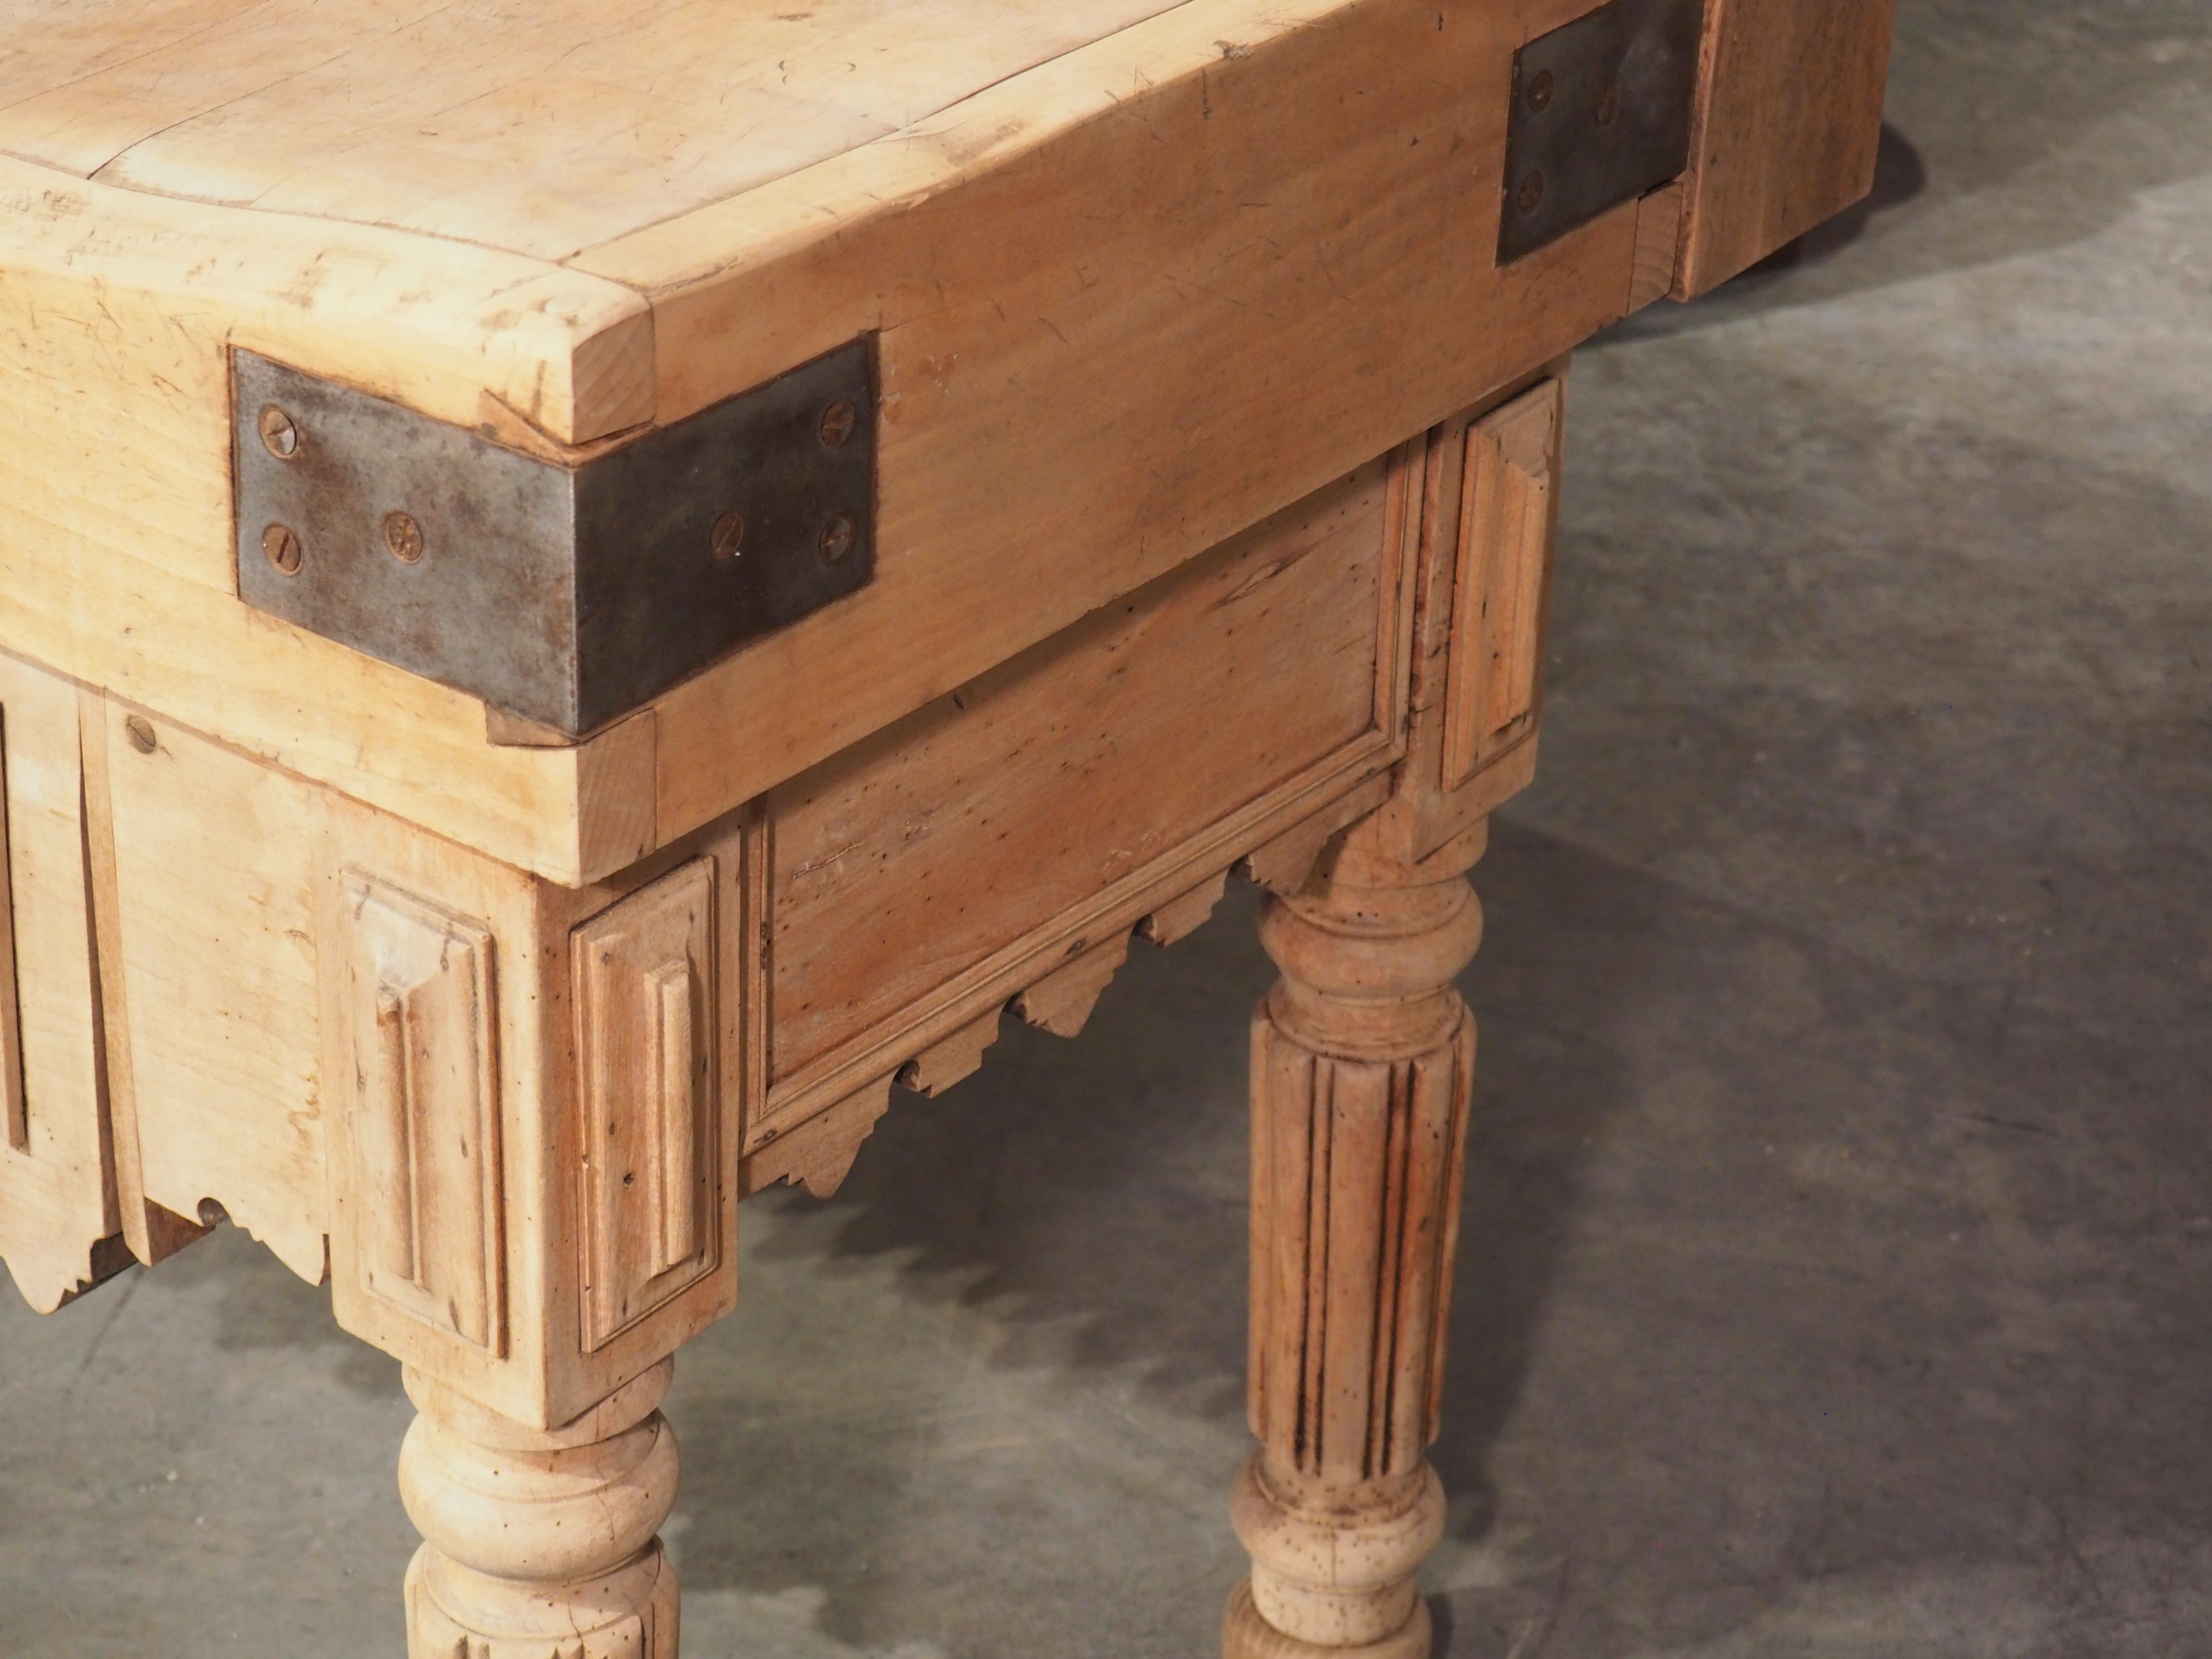 Manufactured in Lille, France, circa 1880, this wood butcher block features a well-used, square parquetry top. The billot (as it is known in France) would have been used in a butcher shop to cut and tenderize meat for customers; the bend you see to